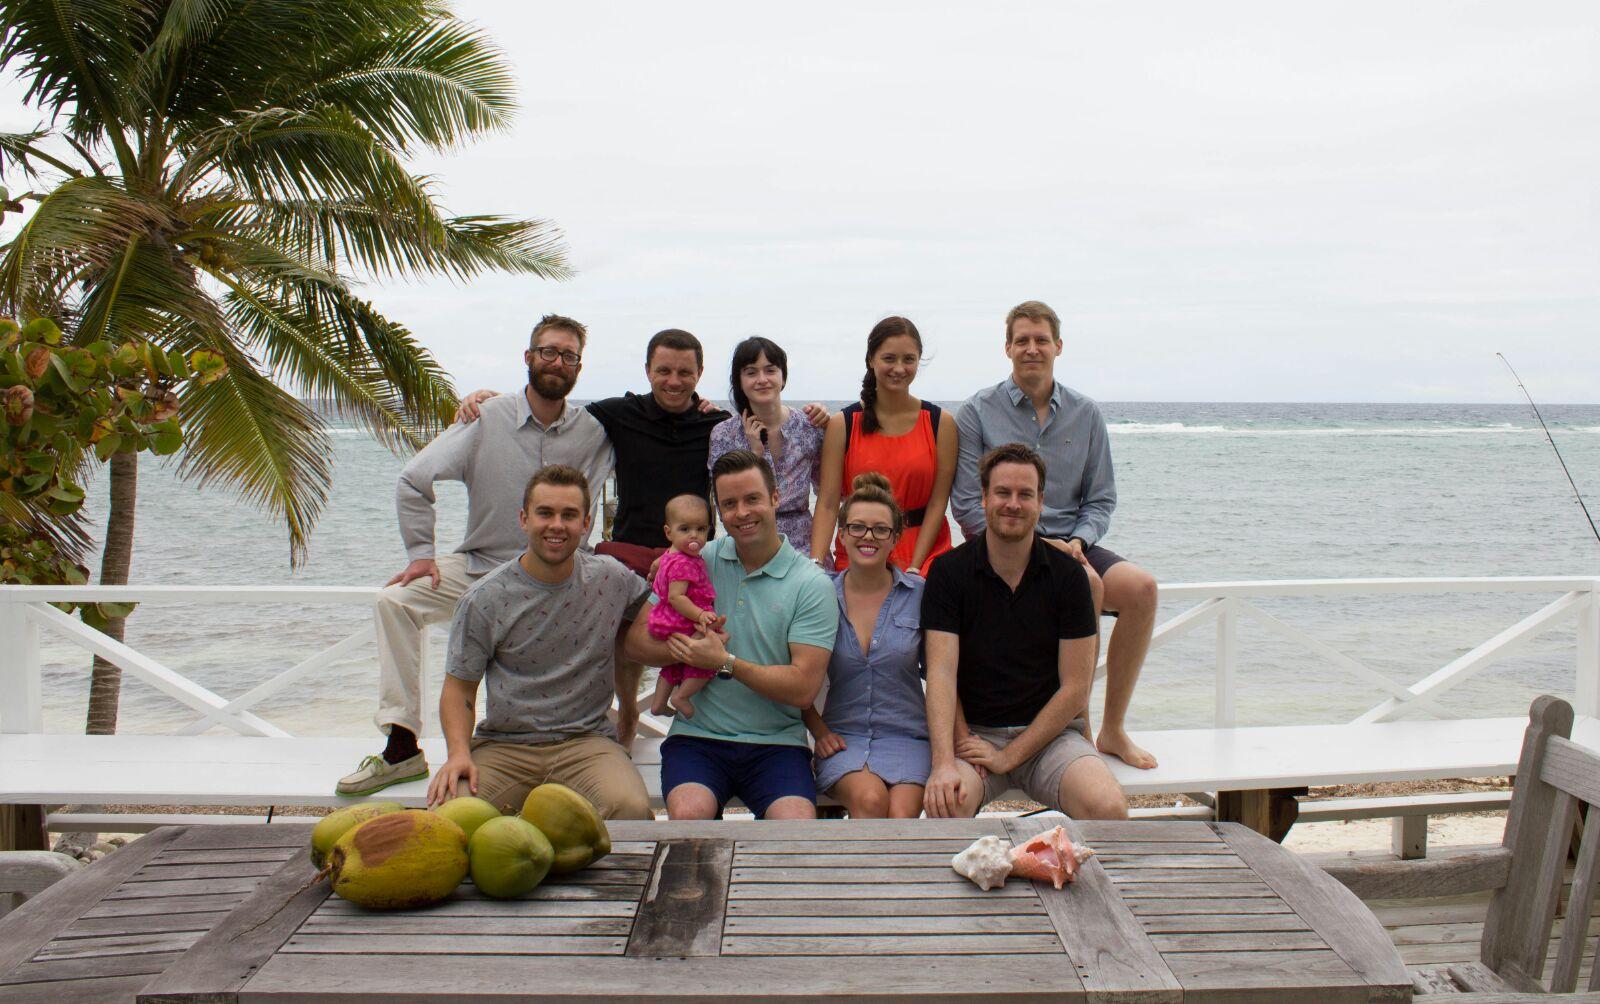 AgencyAnalytics Team Event in the Cayman Islands